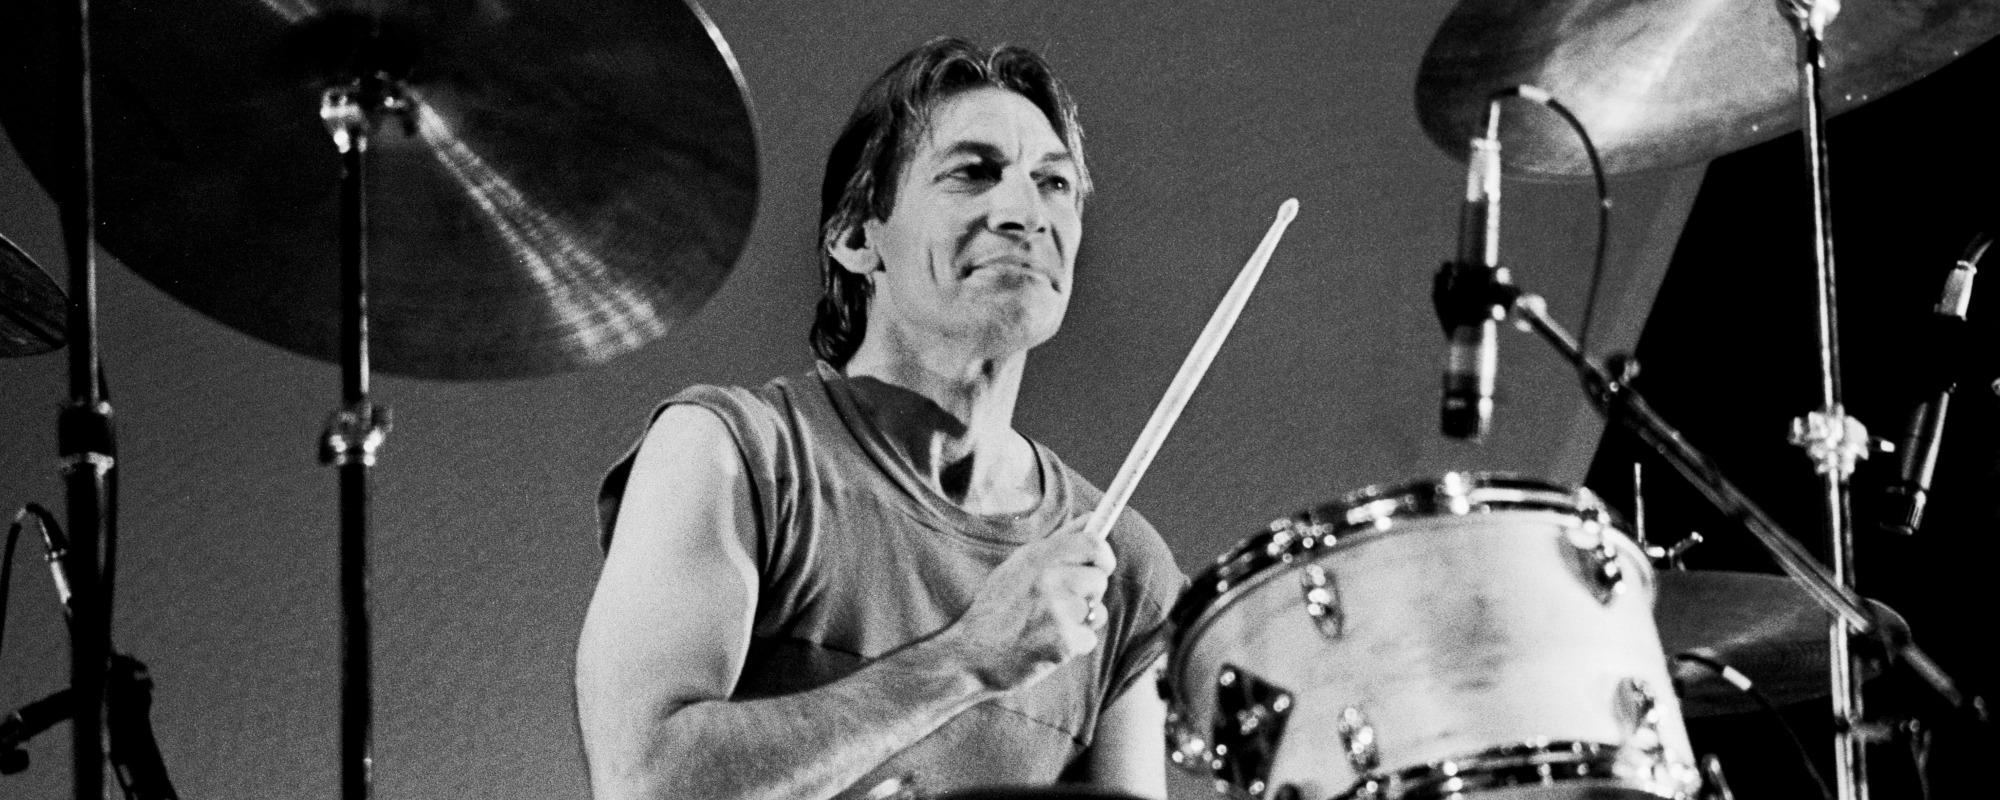 10 Things We Learned About Charlie Watts from Episode 4 of ‘My Life as a Rolling Stone’ Documentary